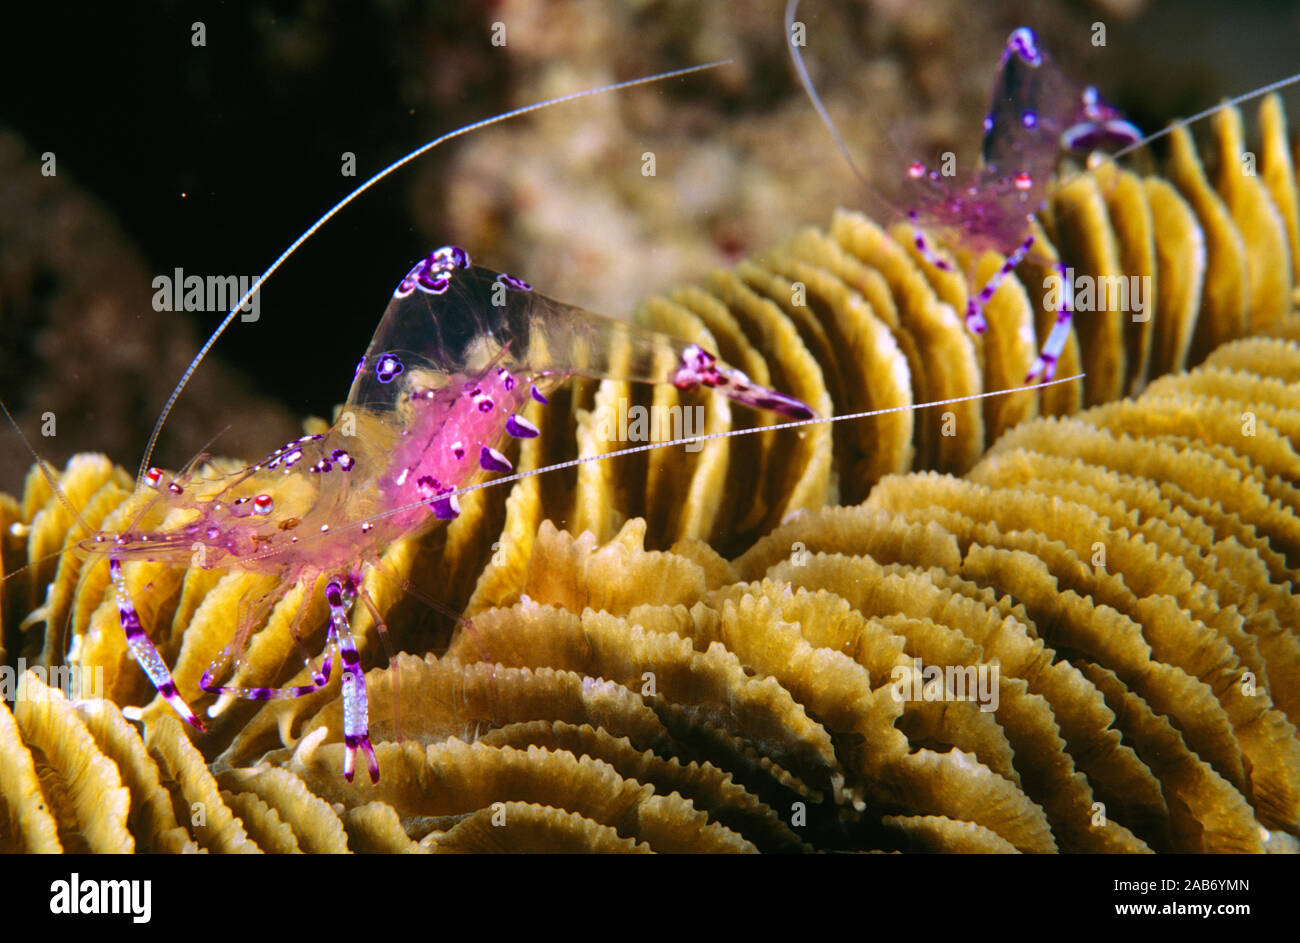 Holthuis cleaner shrimp (Periclimenes holthuisi), with coral. Ambon, Indonesia Stock Photo